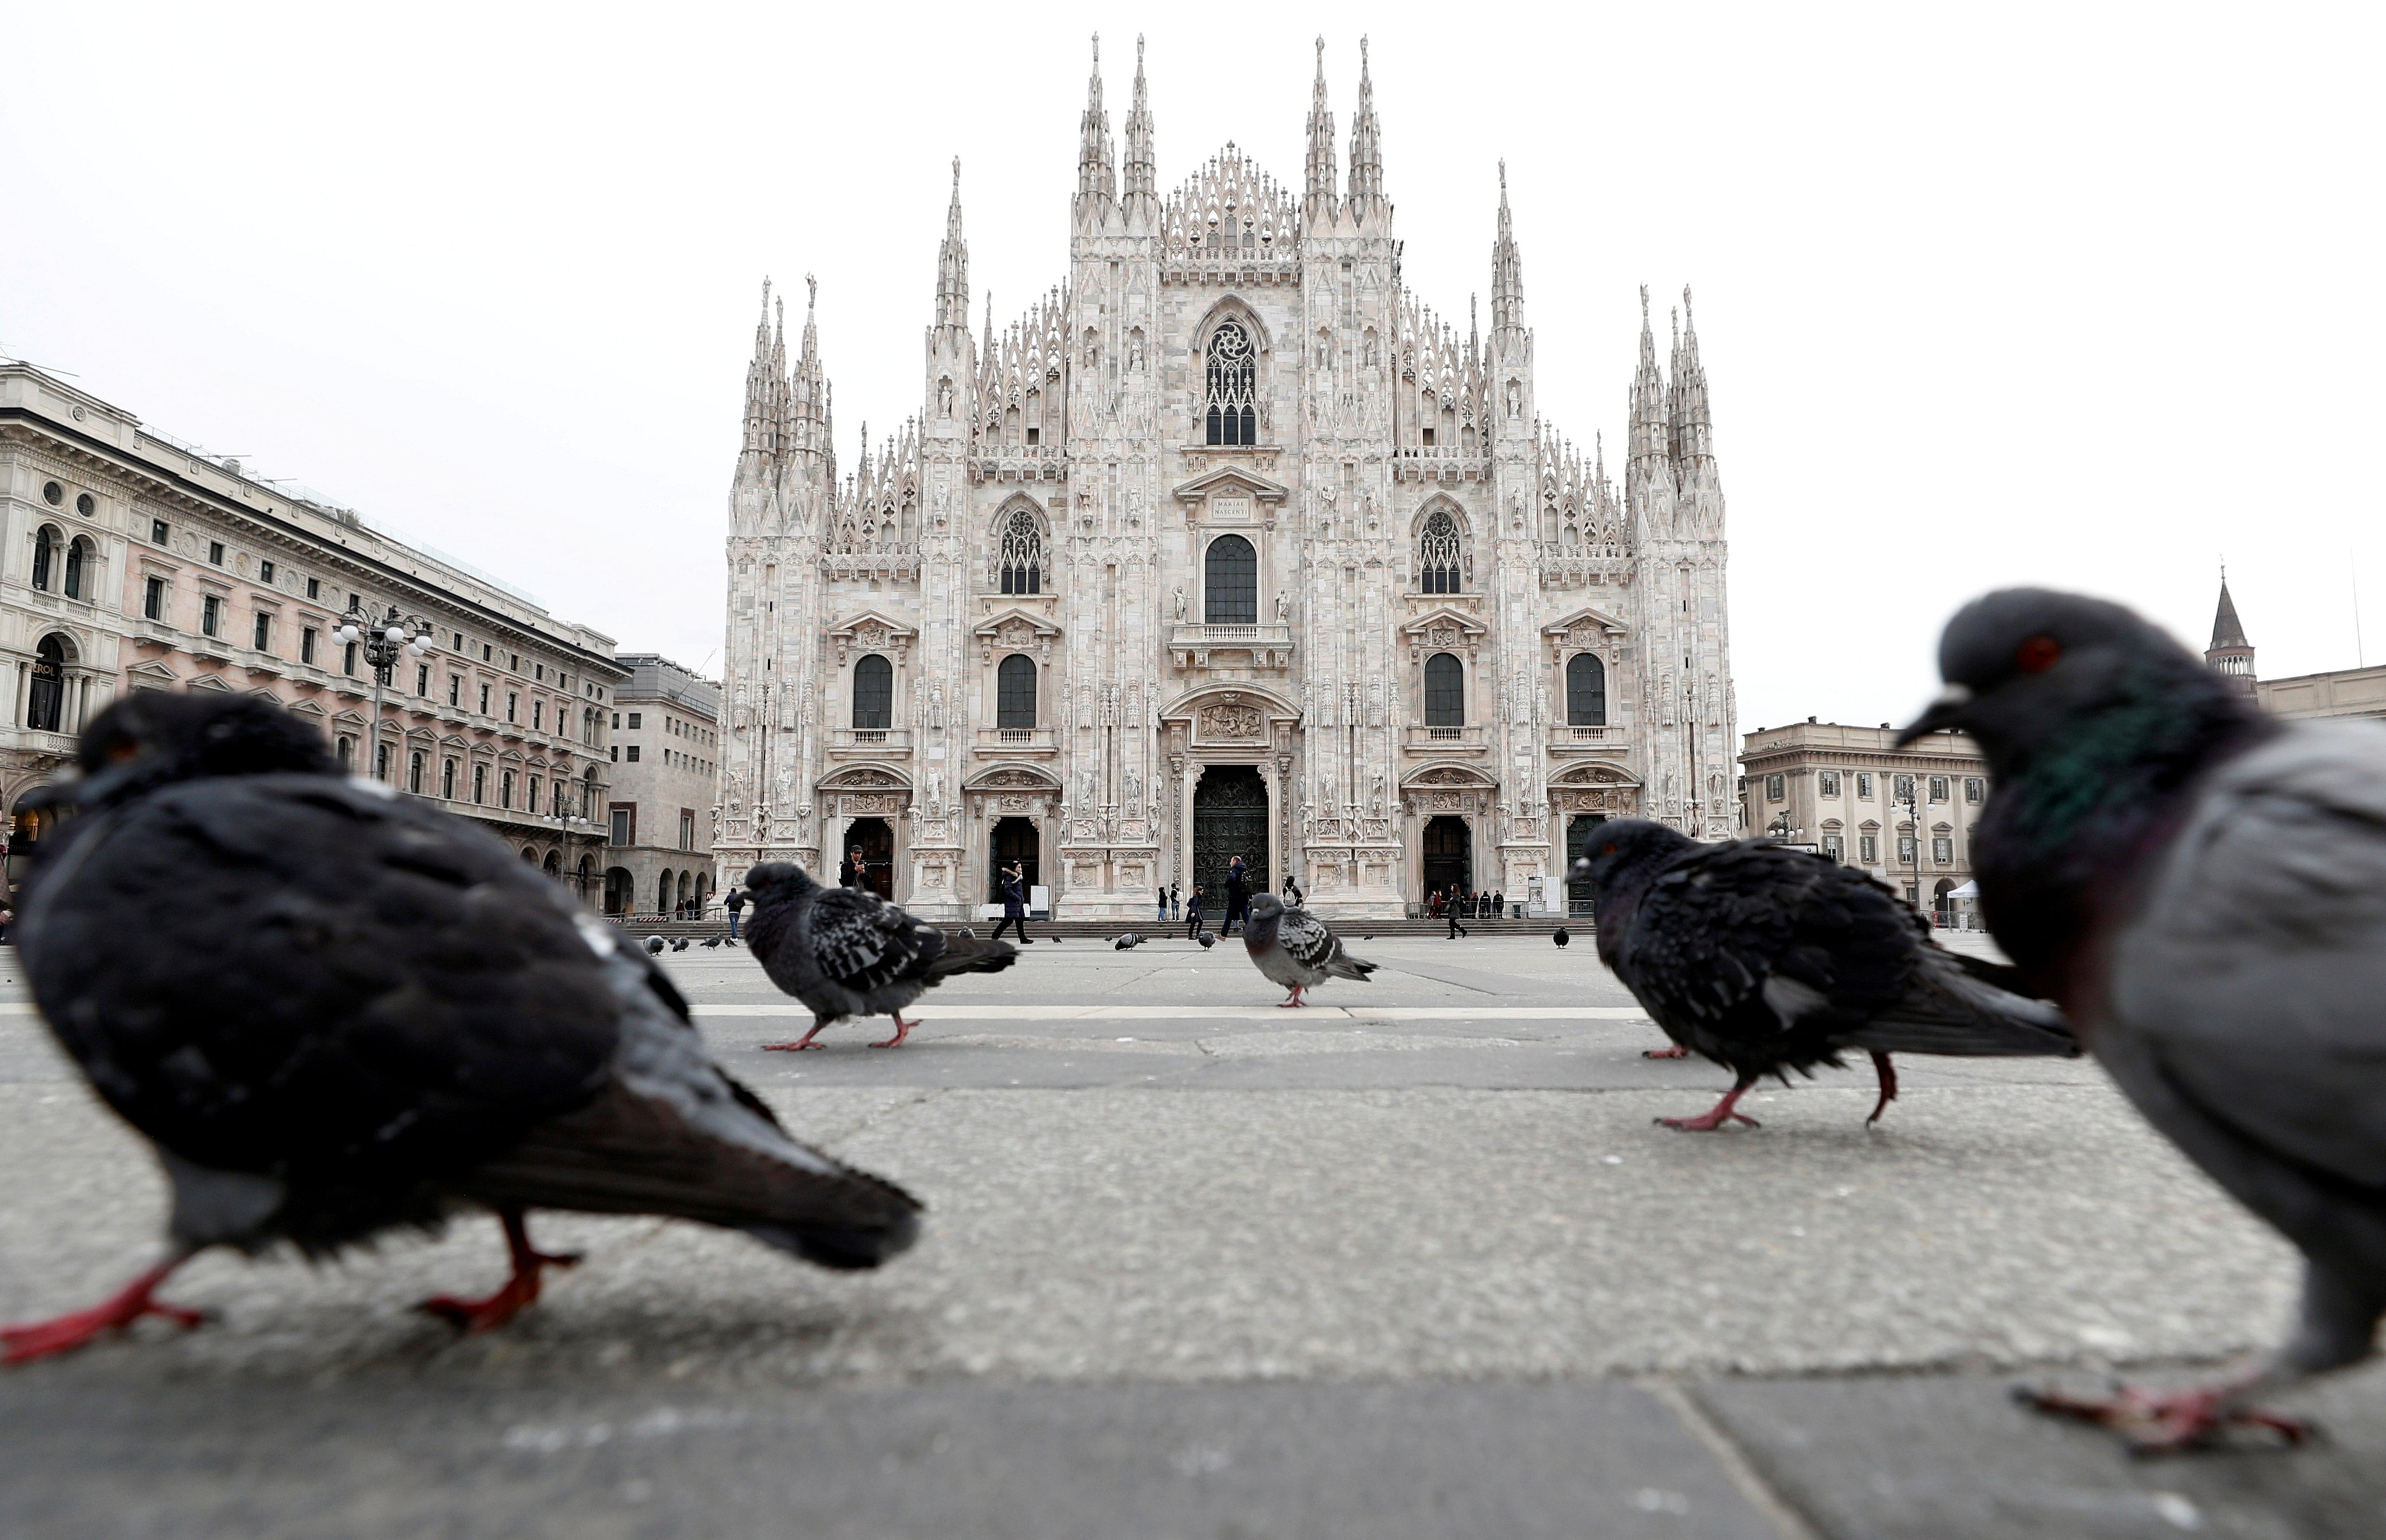 Pigeons roam around Piazza Duomo square after a lockdown is imposed in Northern Italy. (Credit: Reuters)